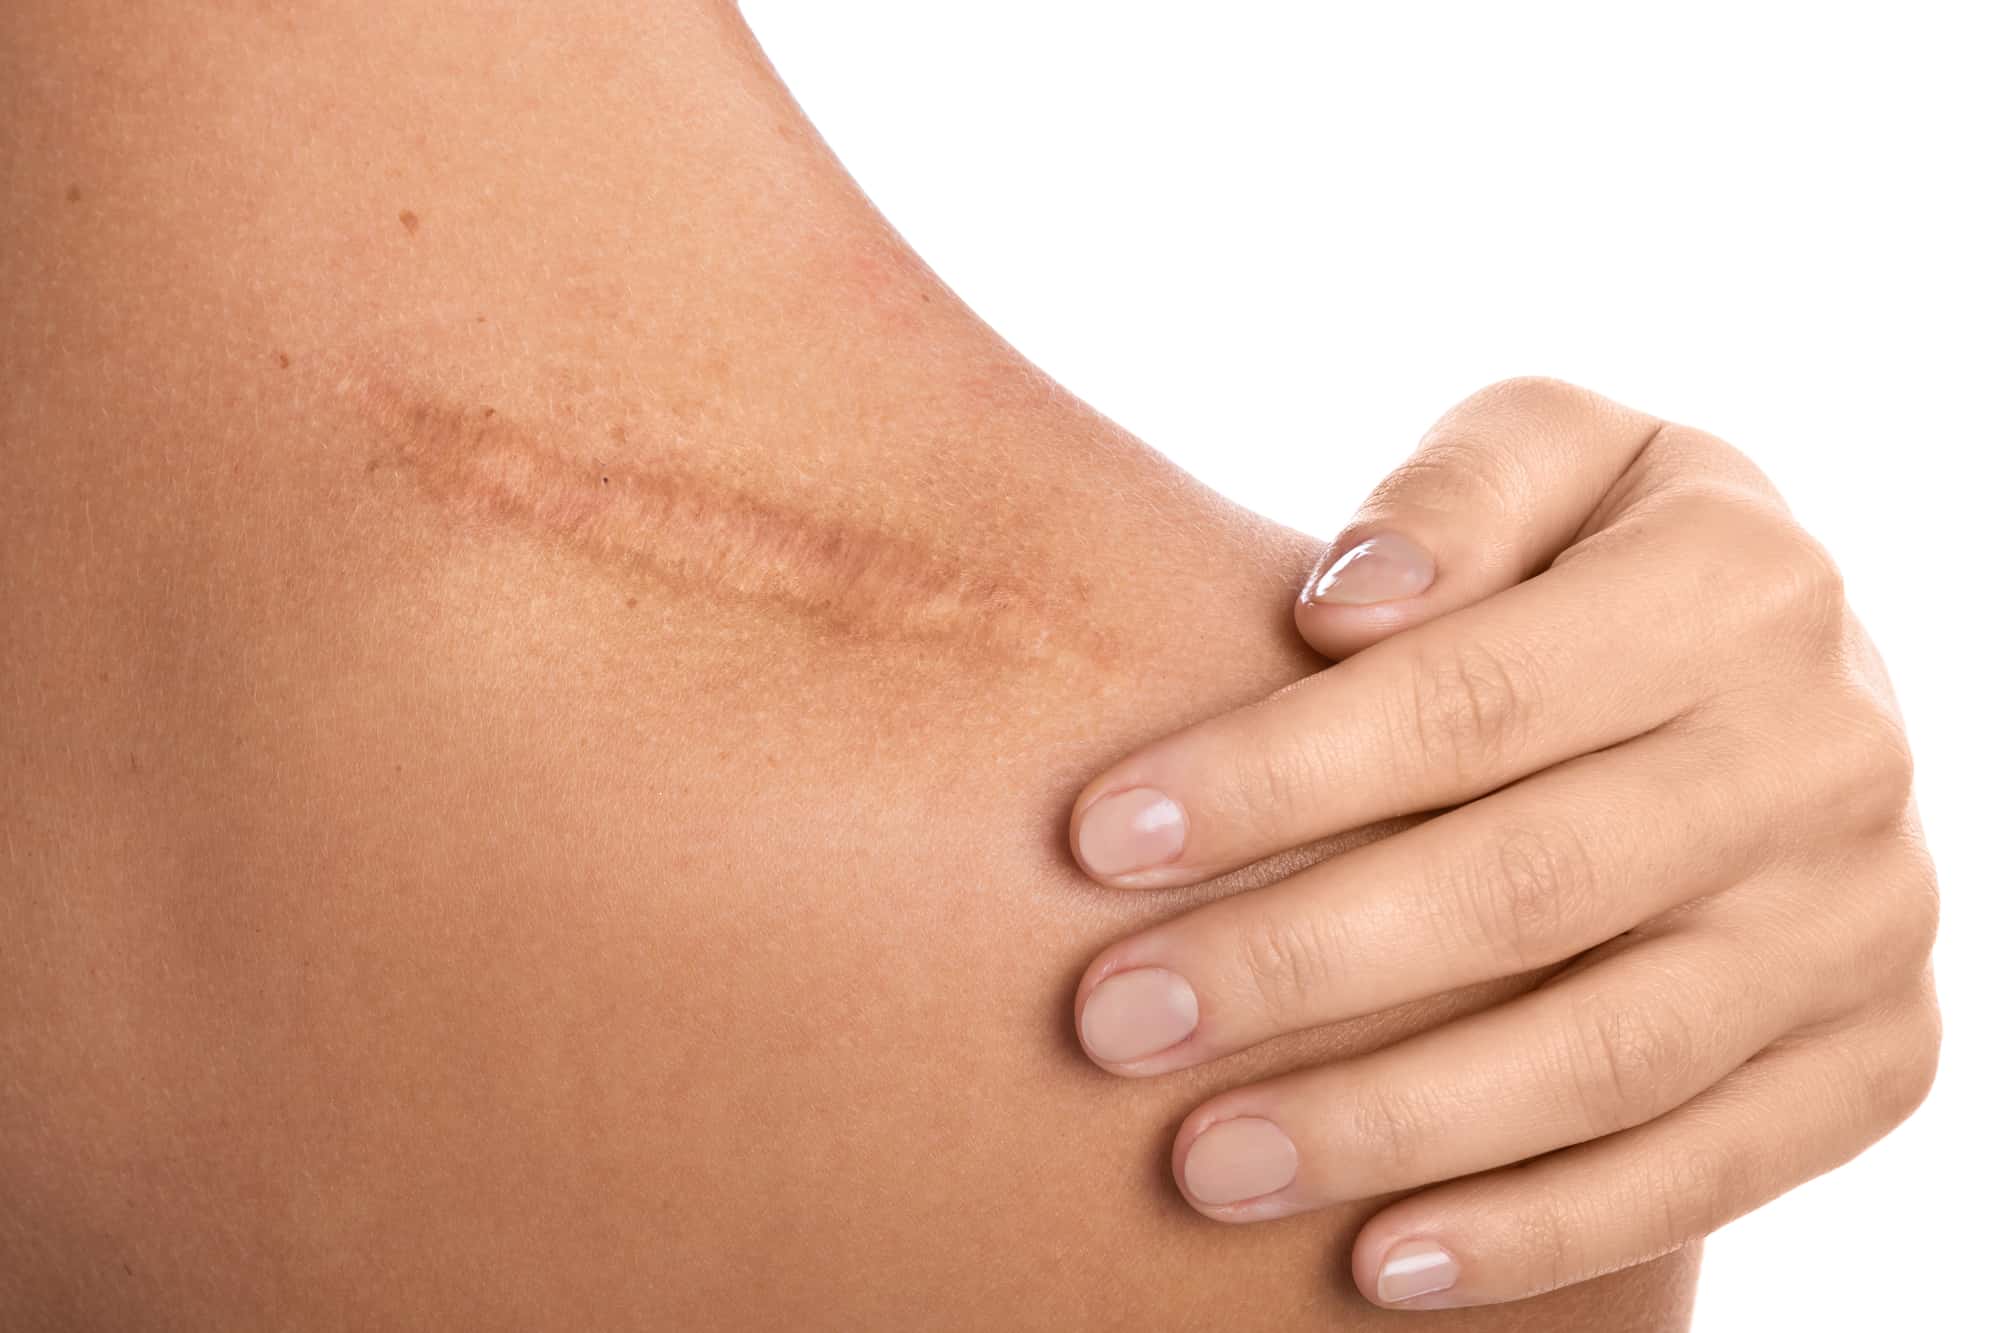 Can I Avoid Getting Scar Tissue After Surgery?